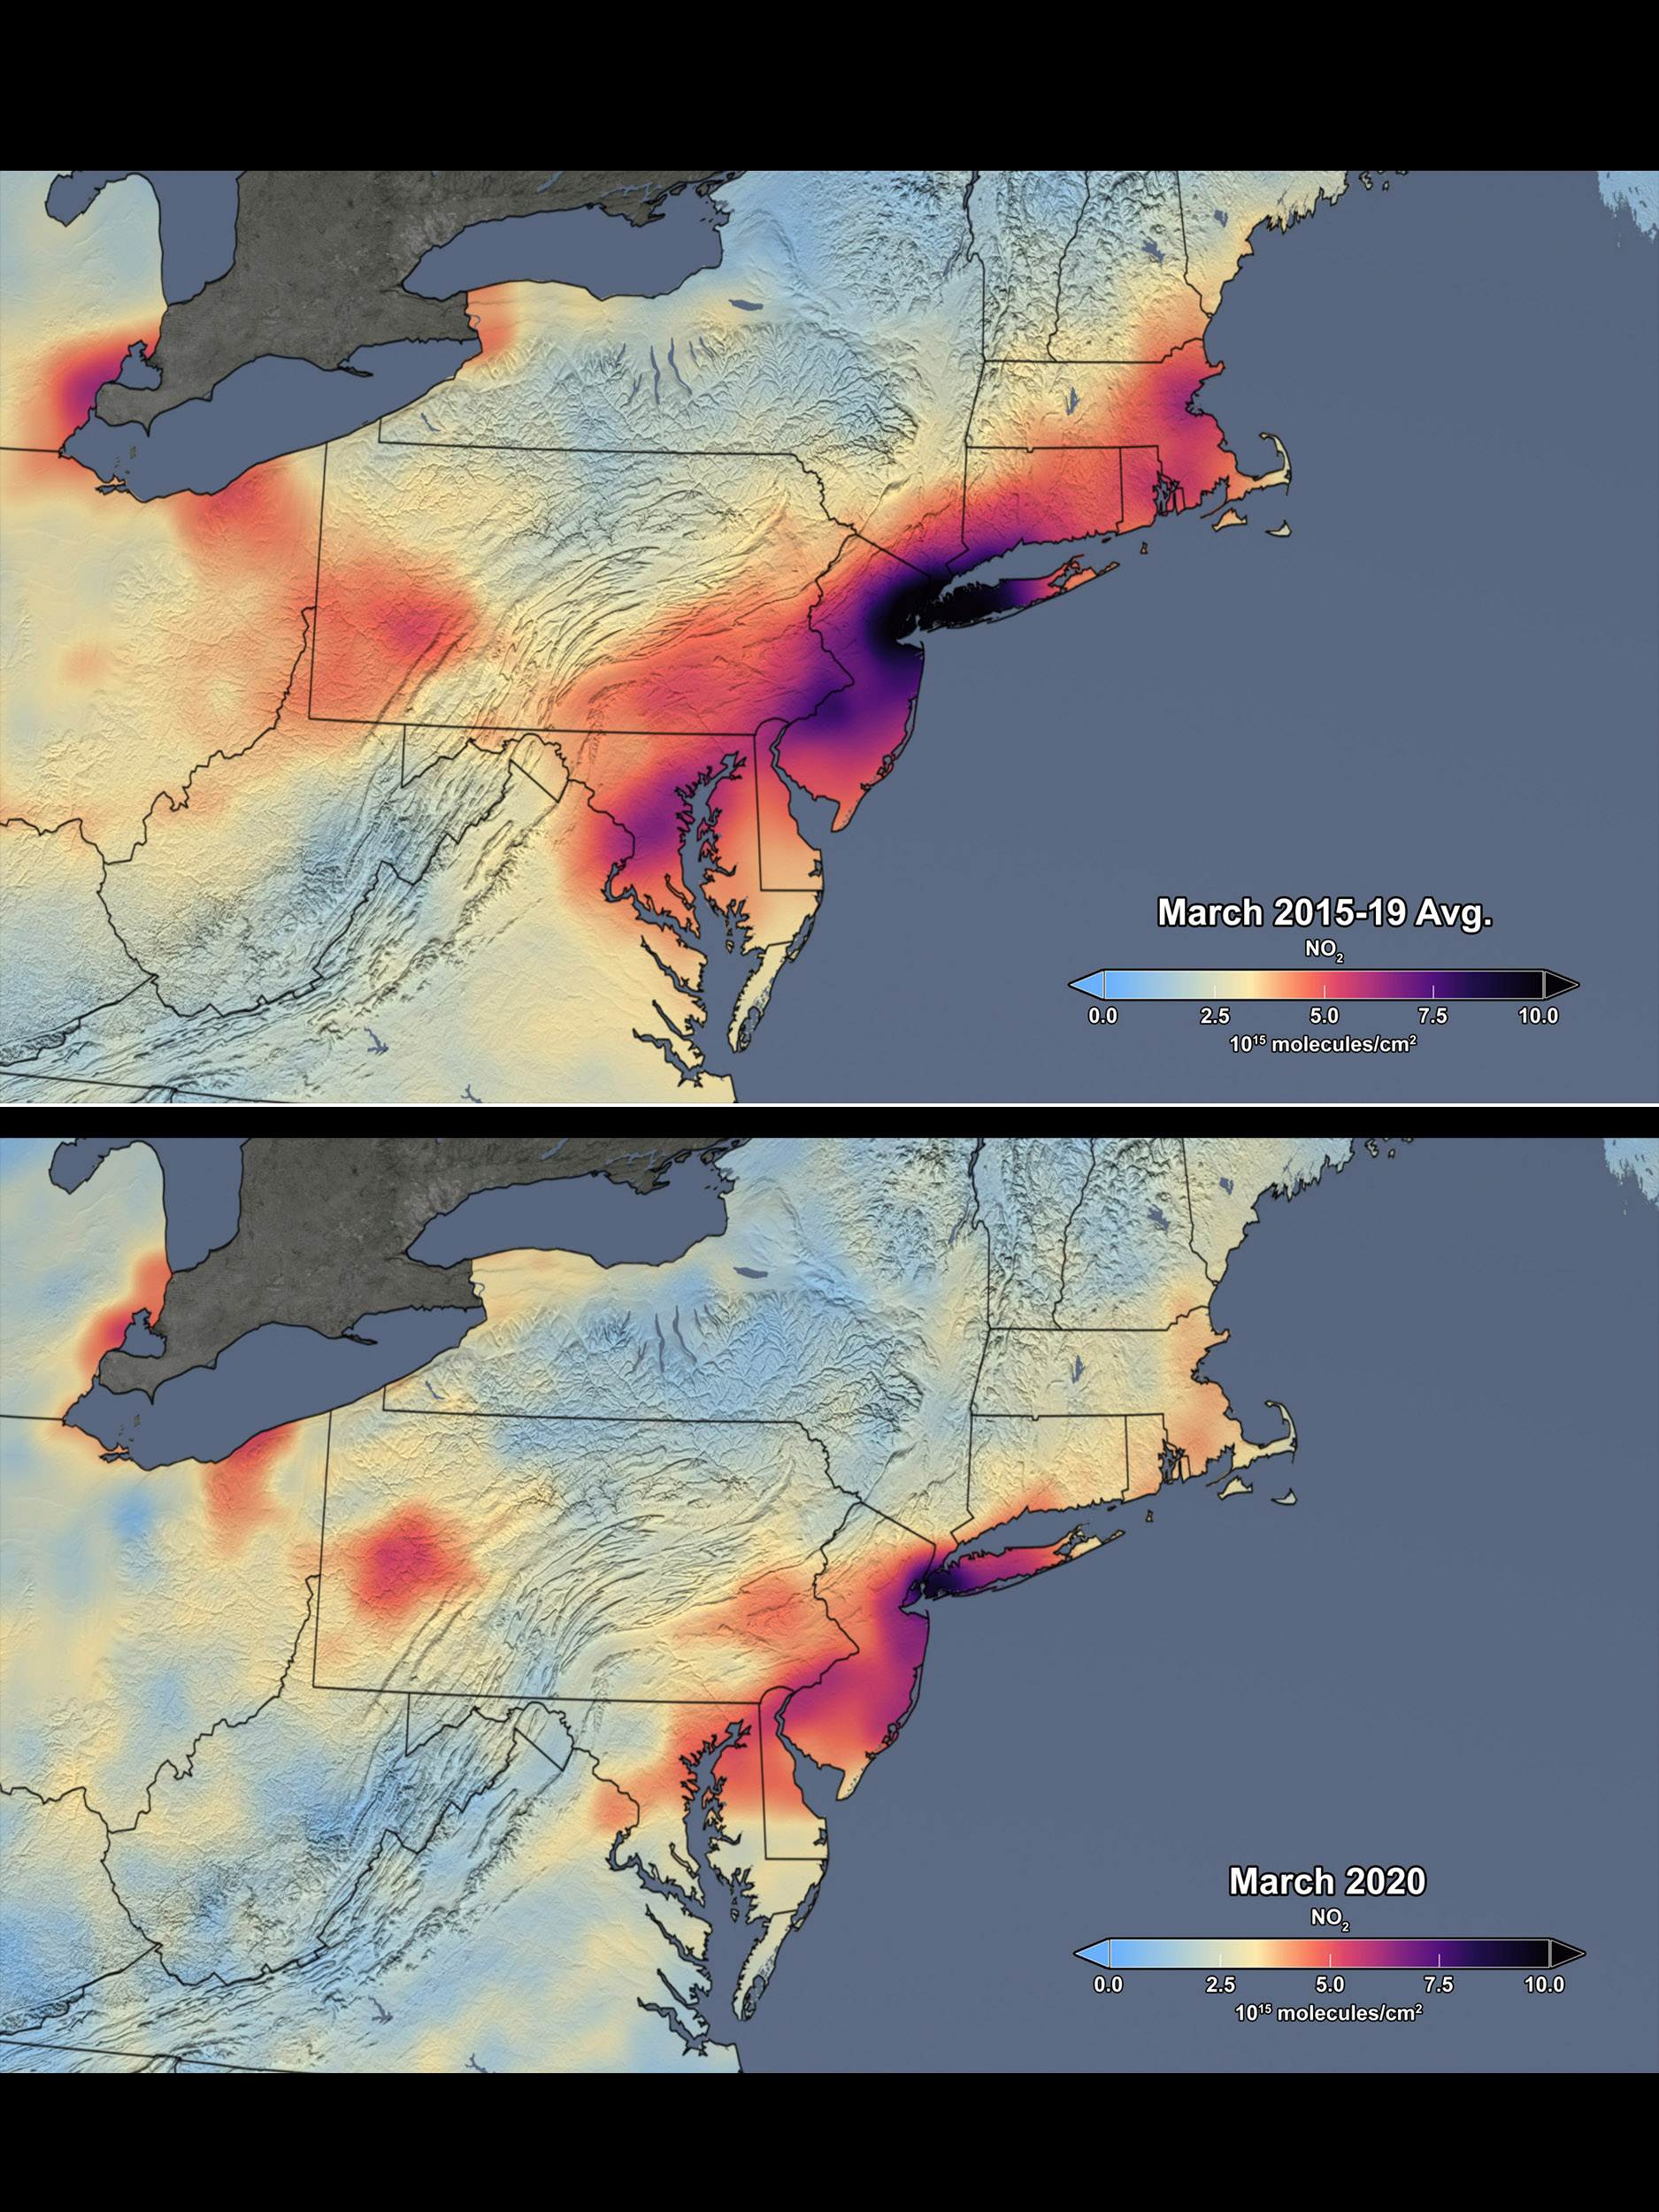 PHOTO: These images show satellite data of nitrogen dioxide from the Aura Ozone Monitoring Instrument (OMI) over the Northeast United States in March, comparing the mean of the period from 2015 through 2019 with the mean for 2020. 